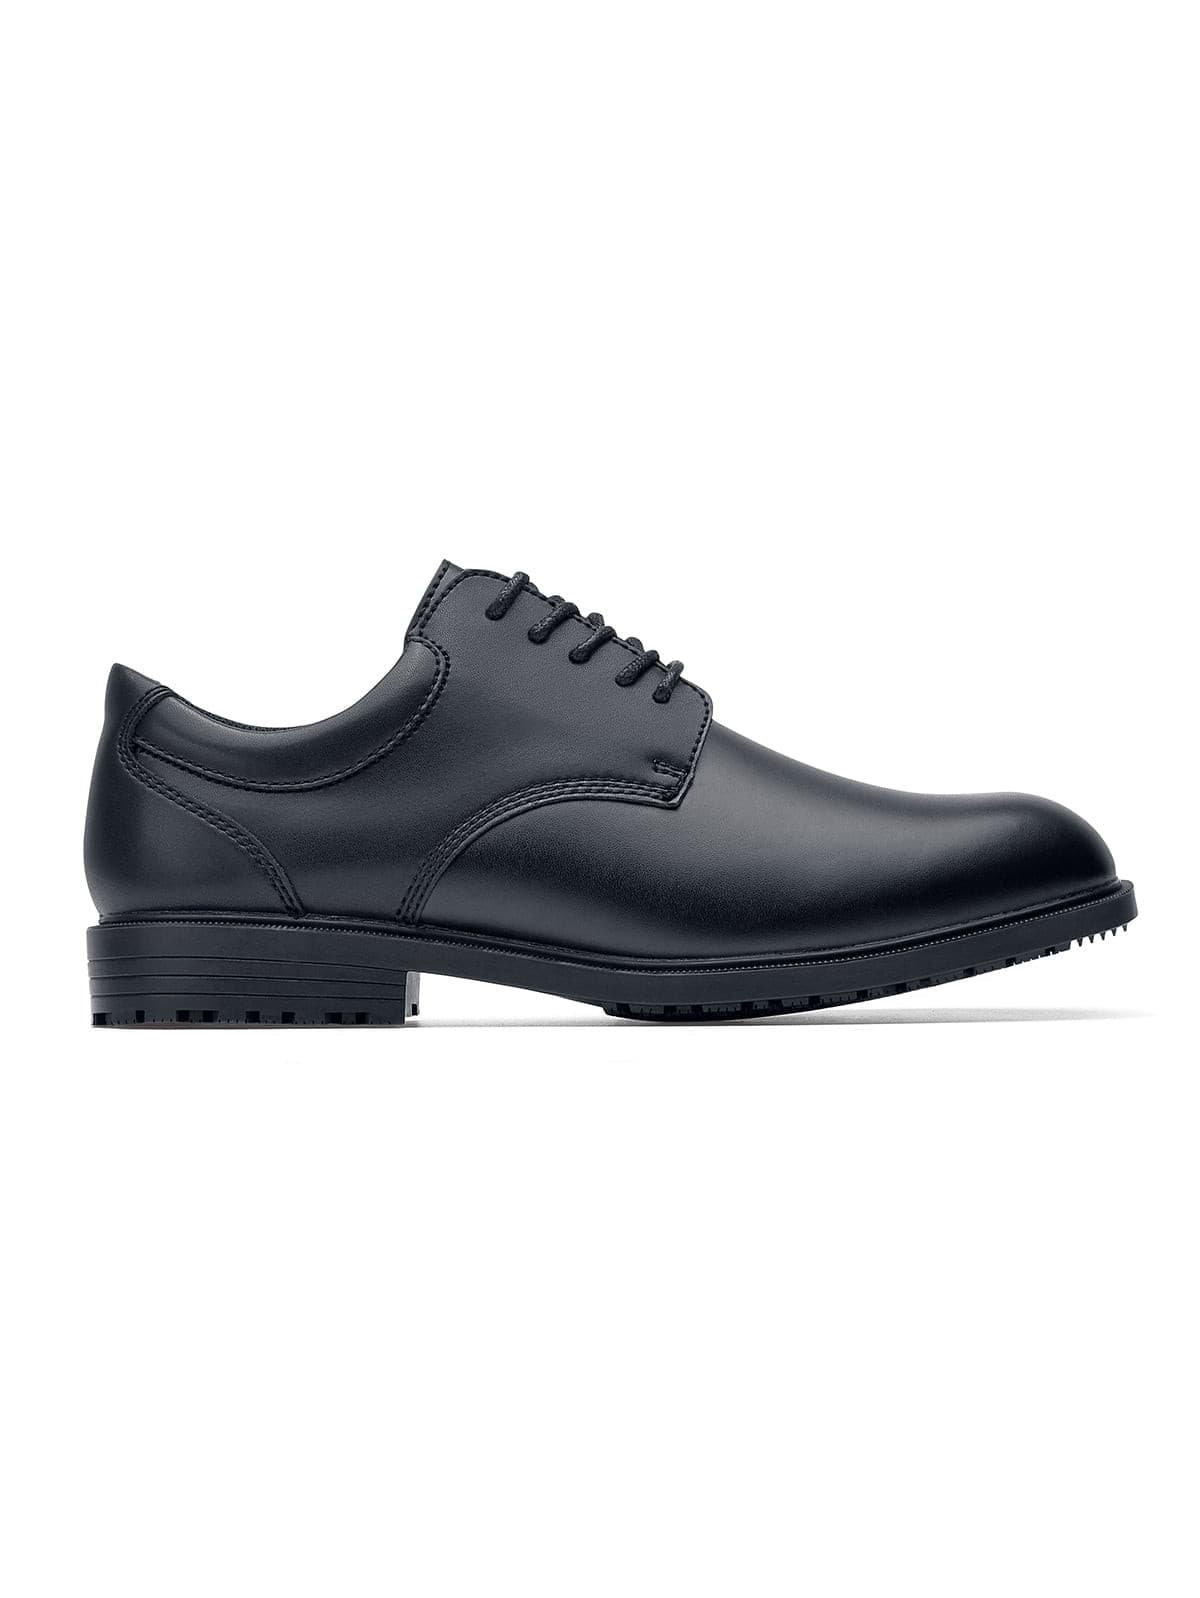 Men's Work Shoe Cambridge III by Shoes For Crews -  ChefsCotton